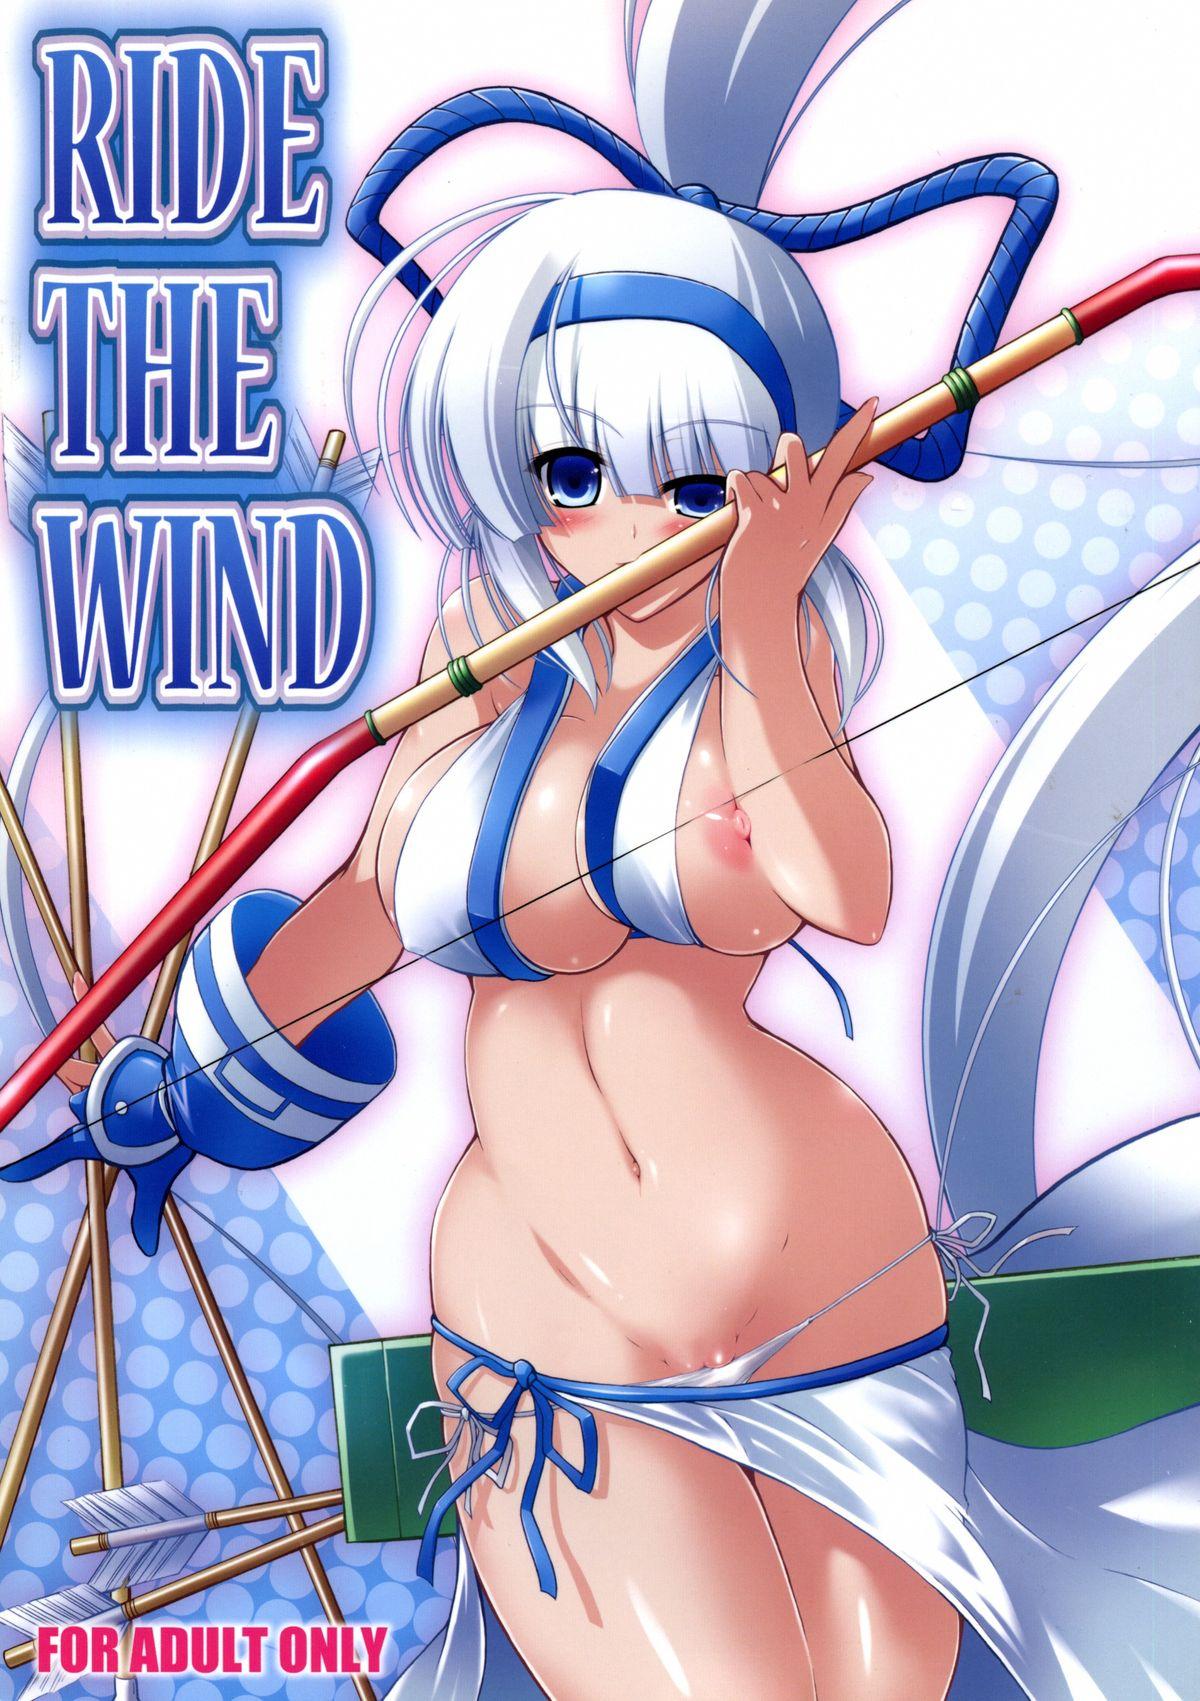 RIDE THE WIND 0